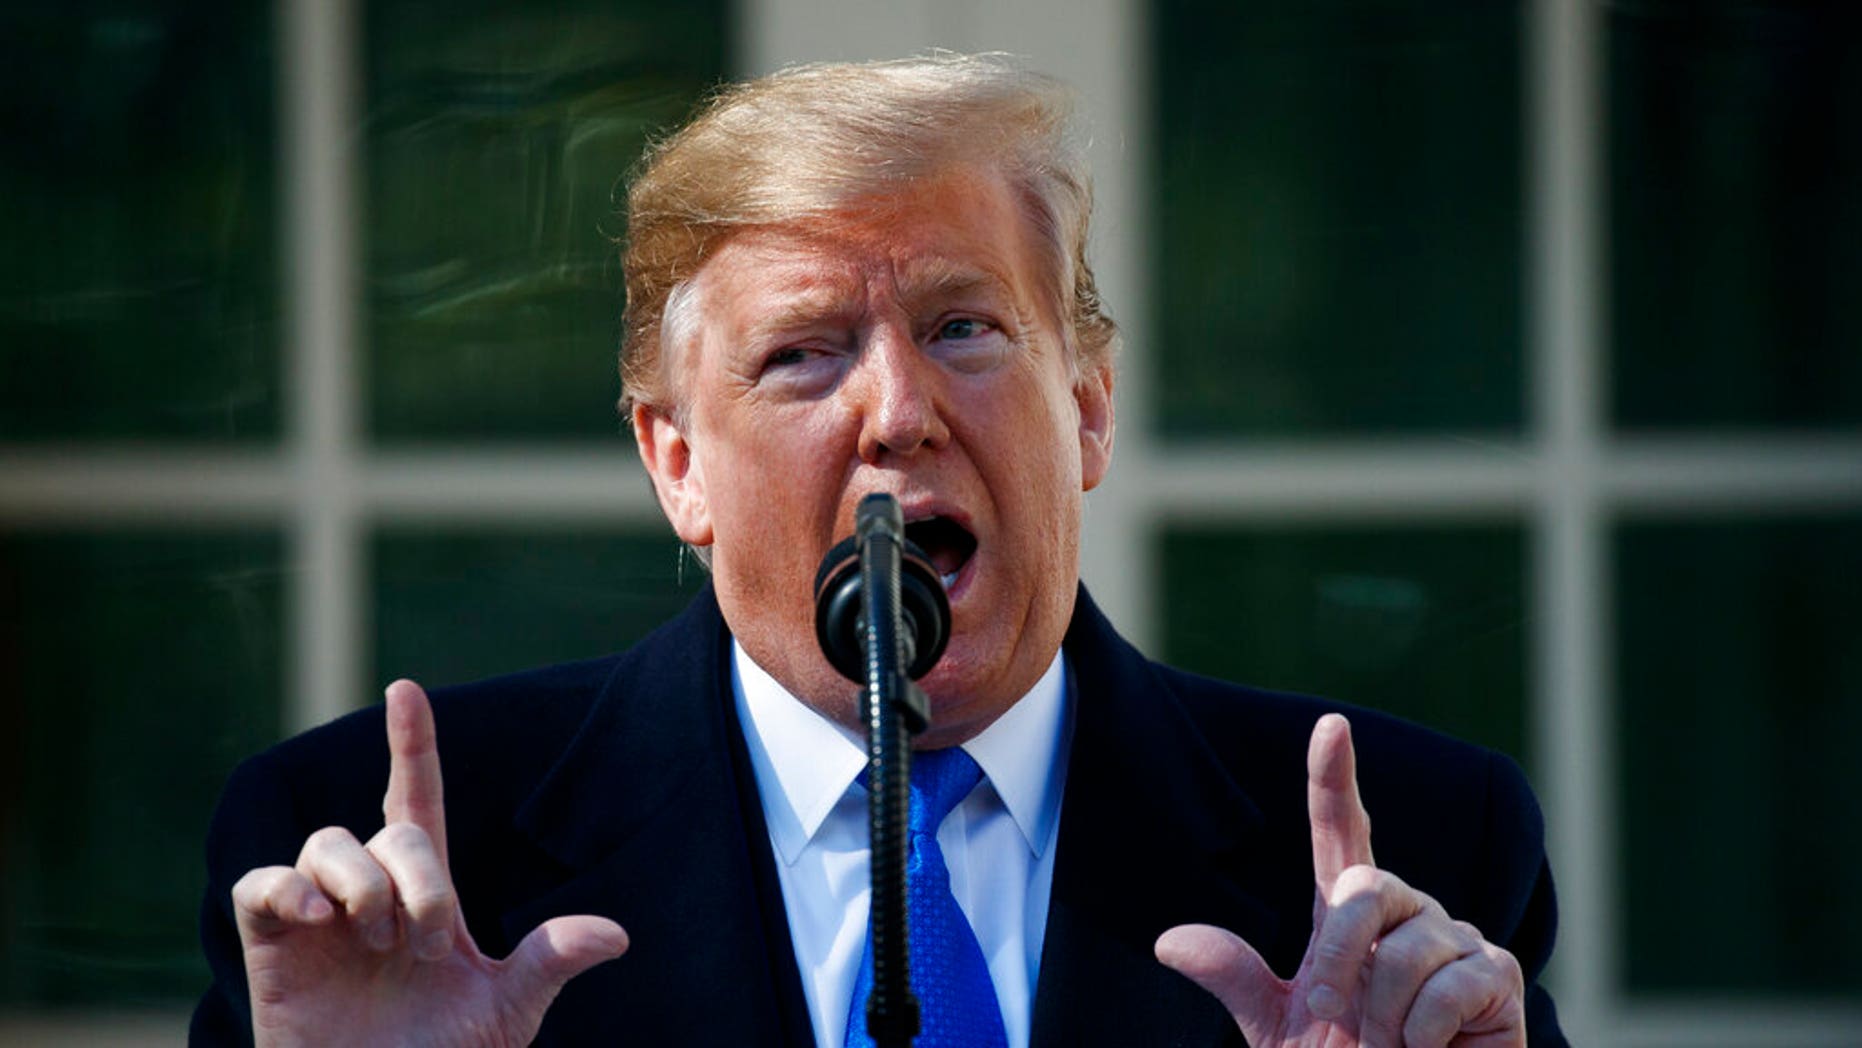 Photo of the archive - President Donald Trump expresses it at a rally organized in the Rose Garden at the White House to declare a national emergency and build a wall along the southern border on Friday February 15, 2019 in Washington. (AP Photo / Evan Vucci)